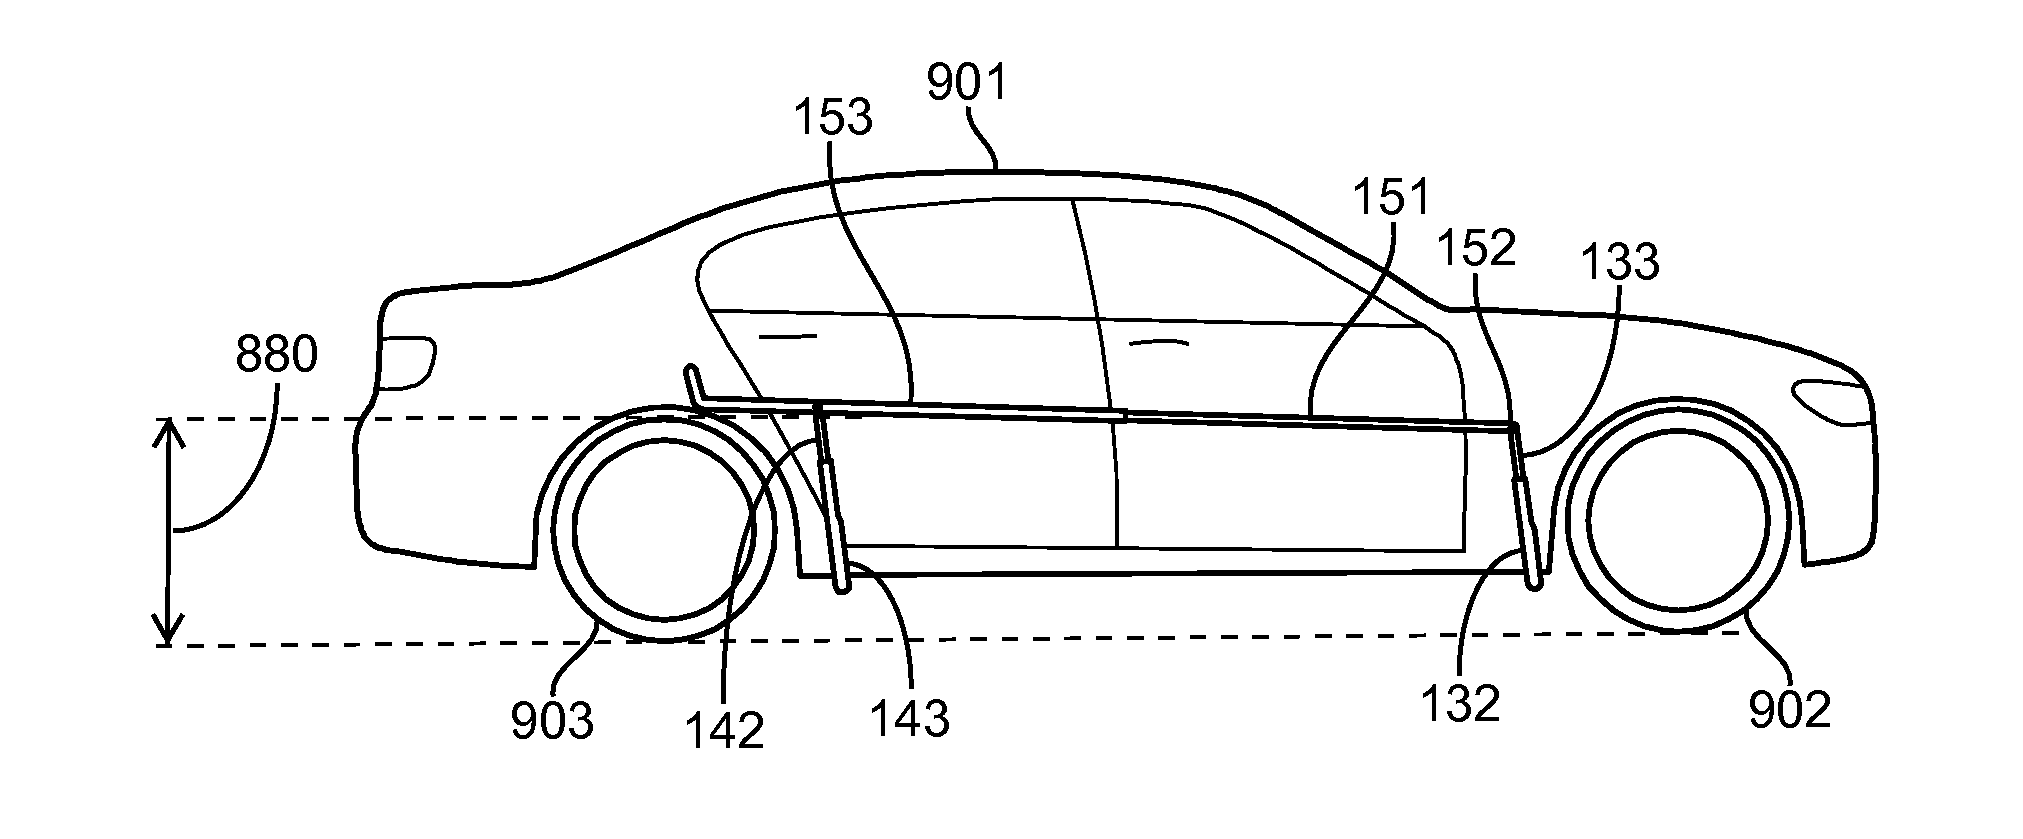 Deployable side protector for vehicles